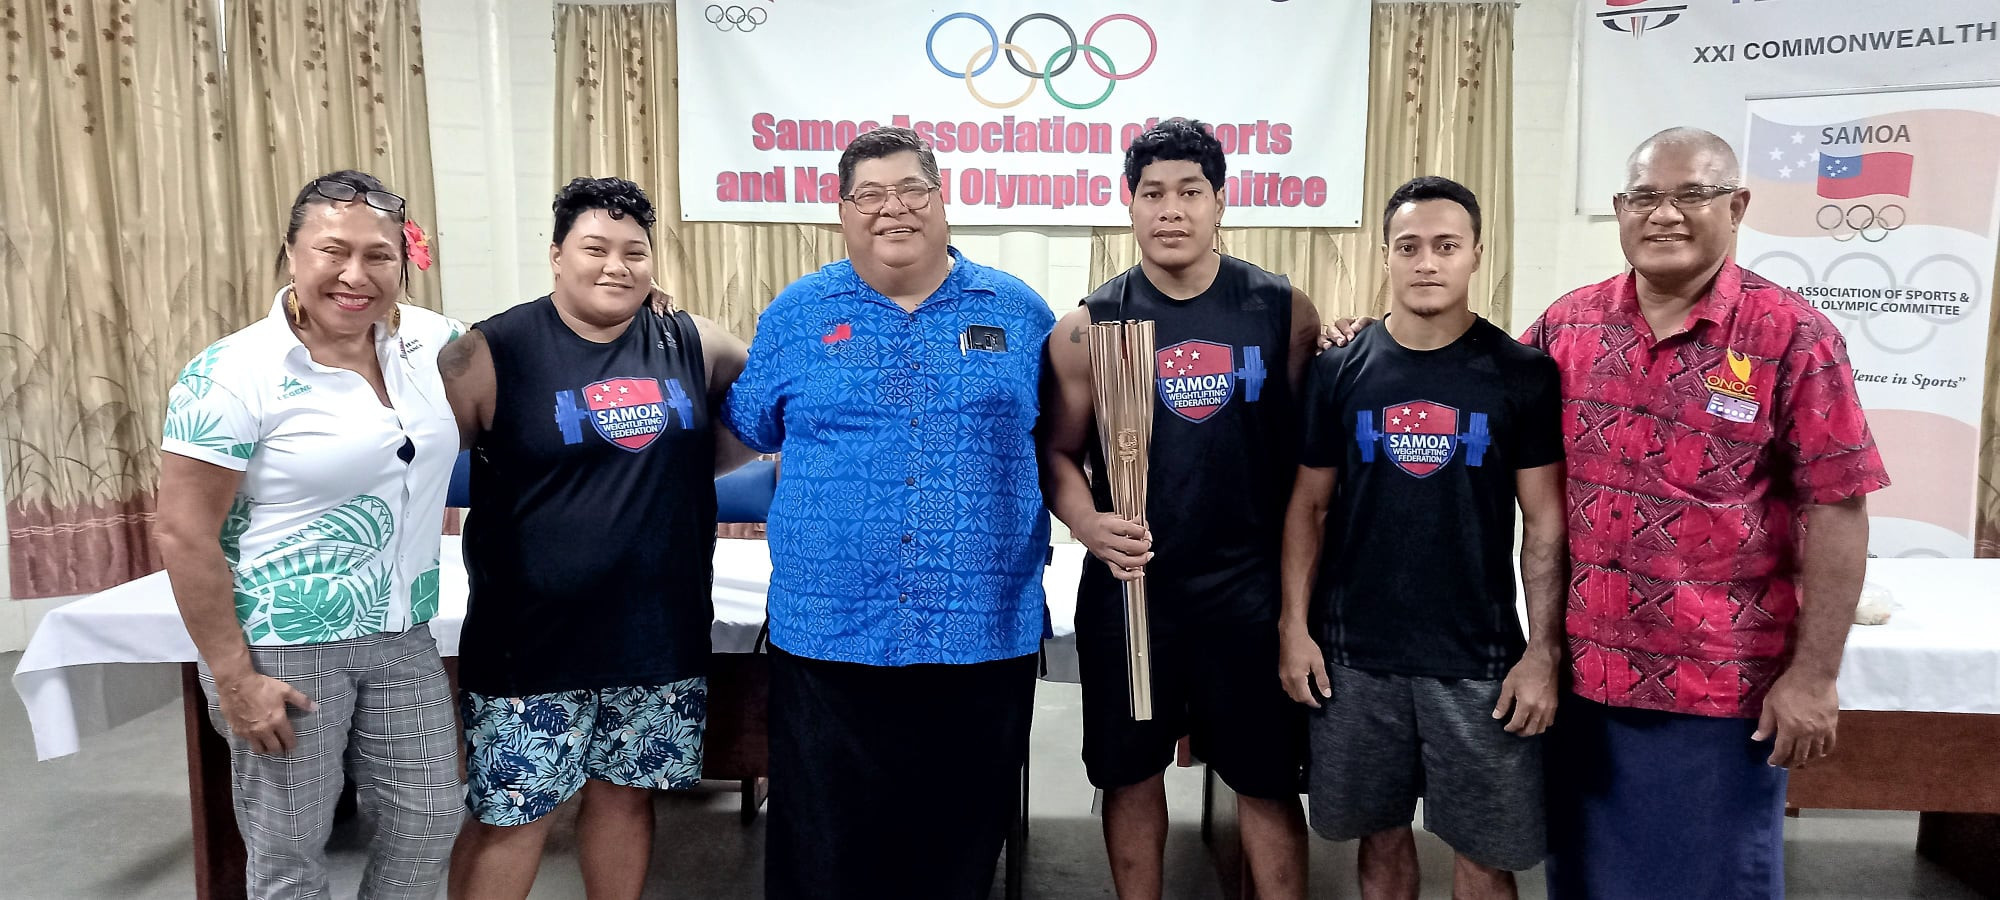 The three weightlifters were presented with their uniforms and gifts at a small gathering held by the SASNOC ©SASNOC